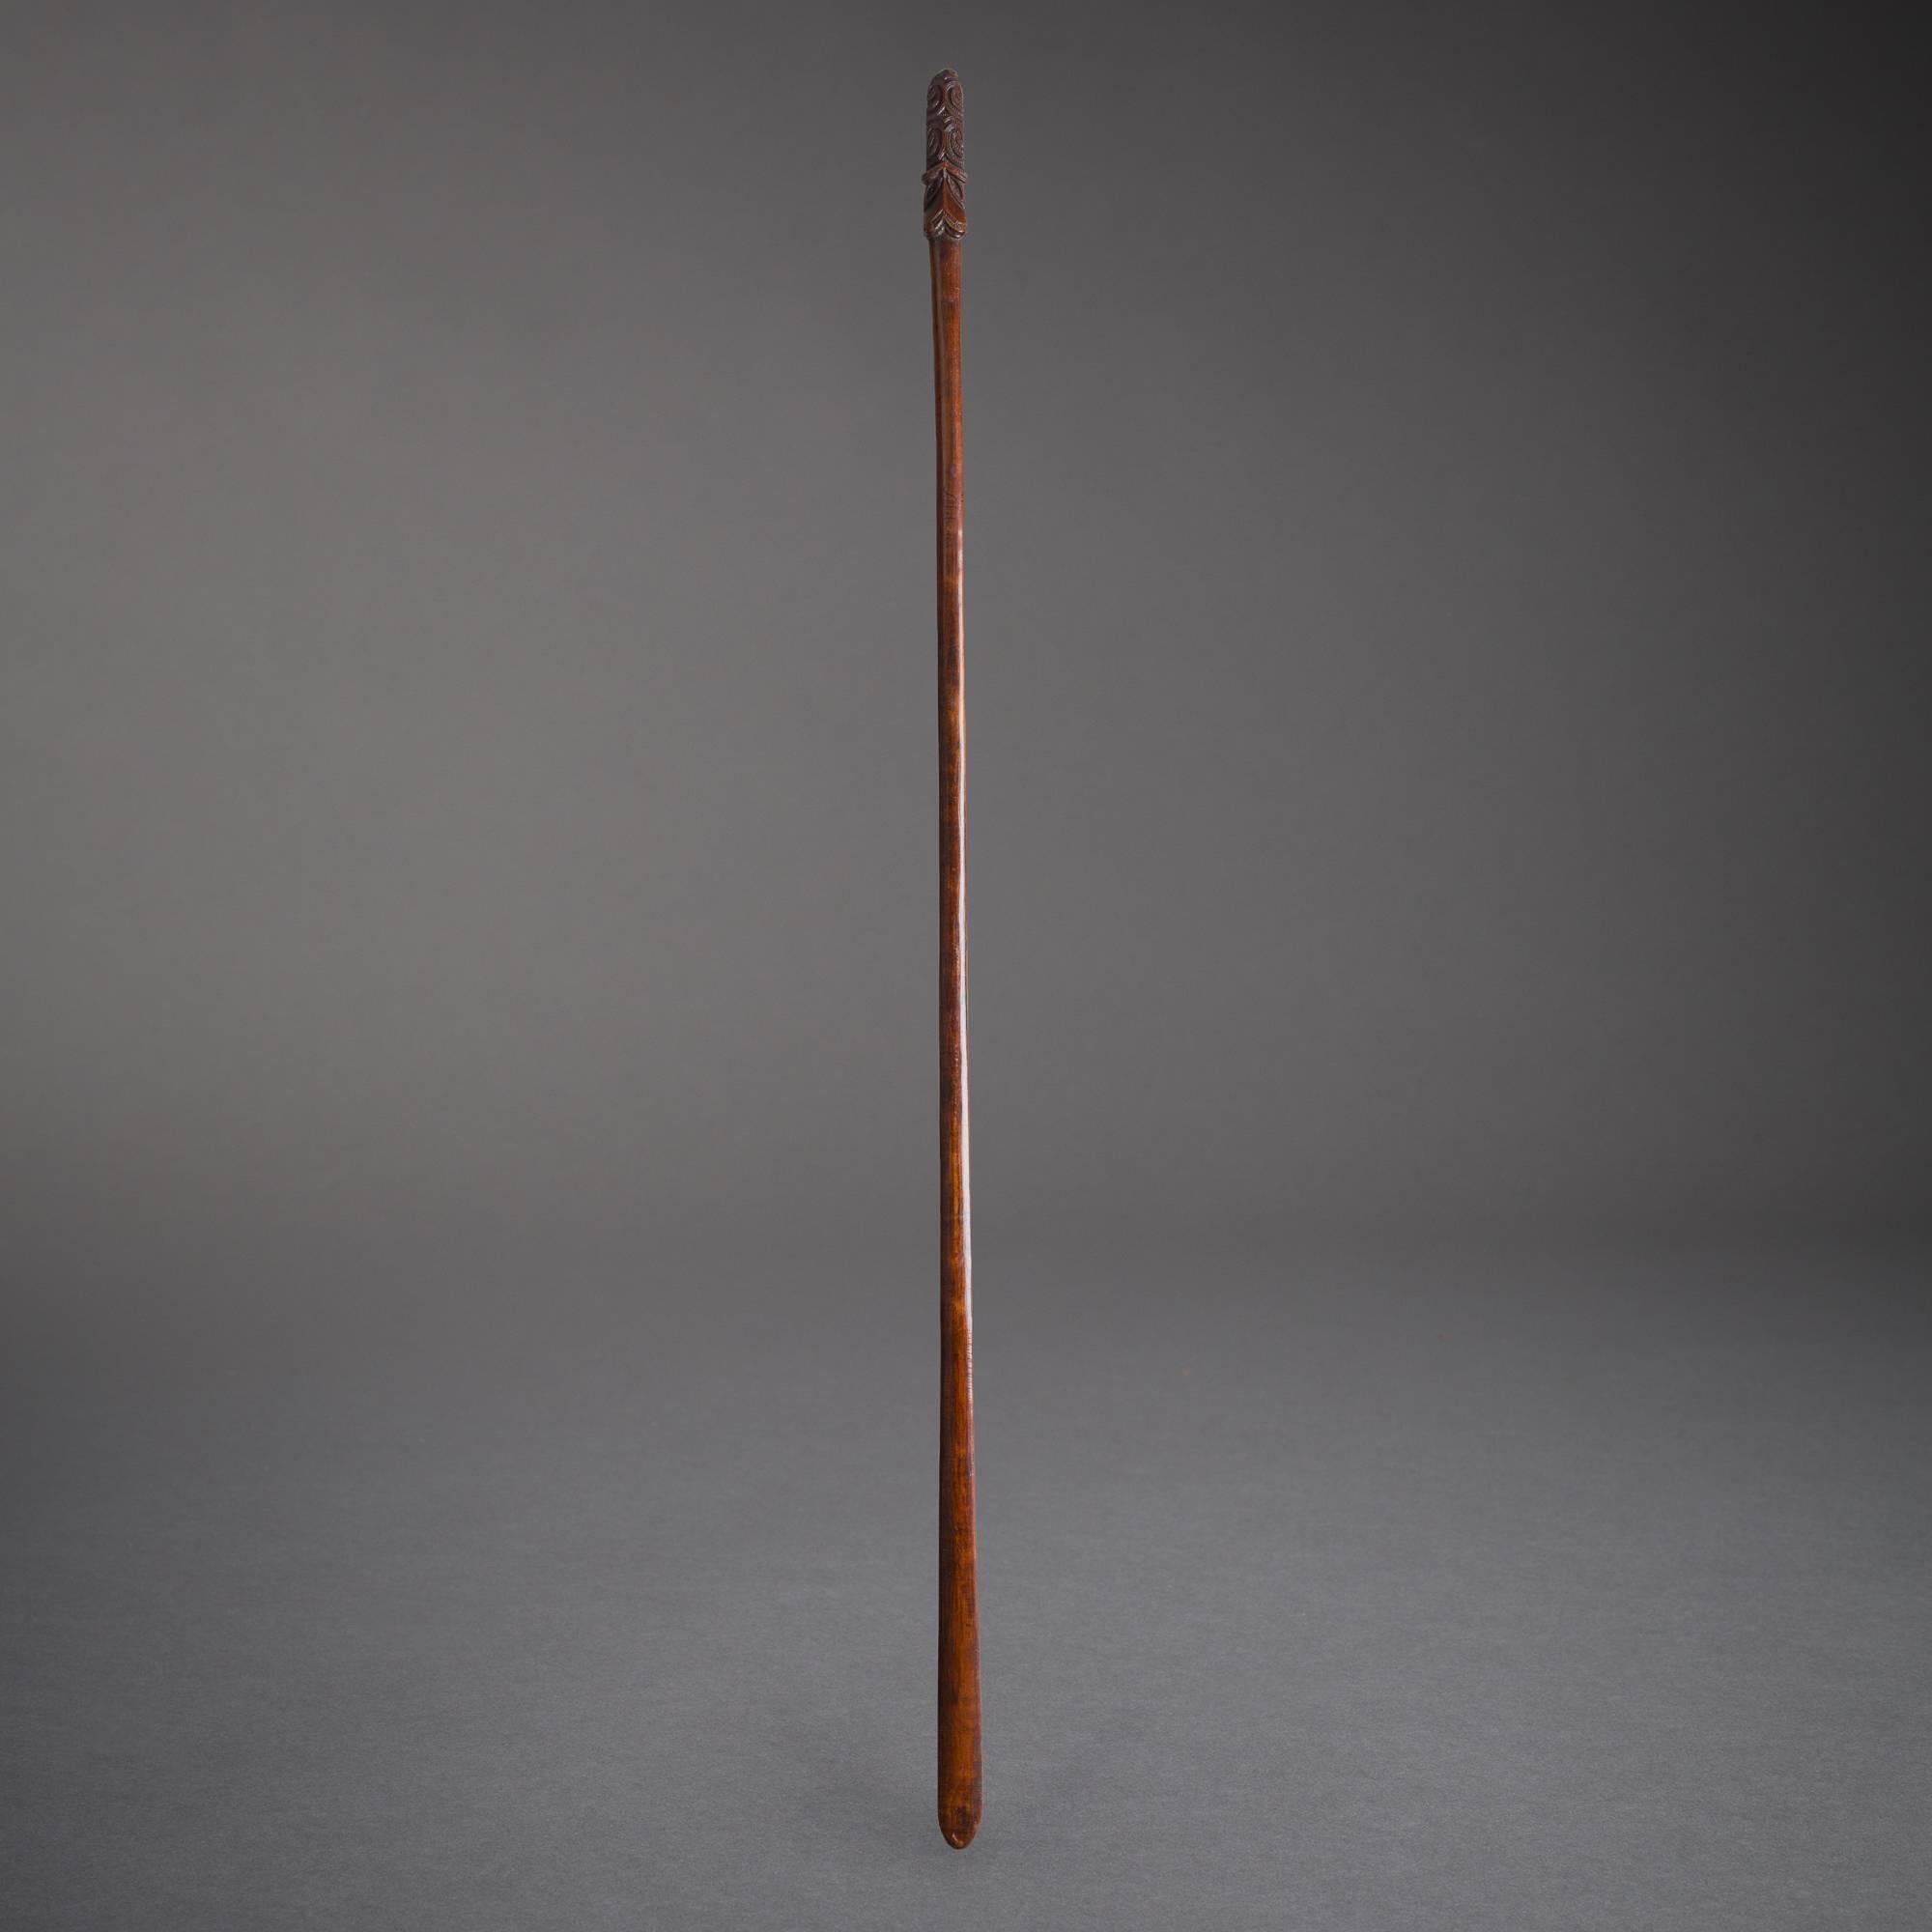 A traditional Maori staff (taiaha), carved from a single piece of hardwood and endowed with a deep, warm patina of age. The 'tongue' of the staff (arero), used to deliver stabbing blows and sharp strikes, is meticulously carved with swirling motifs